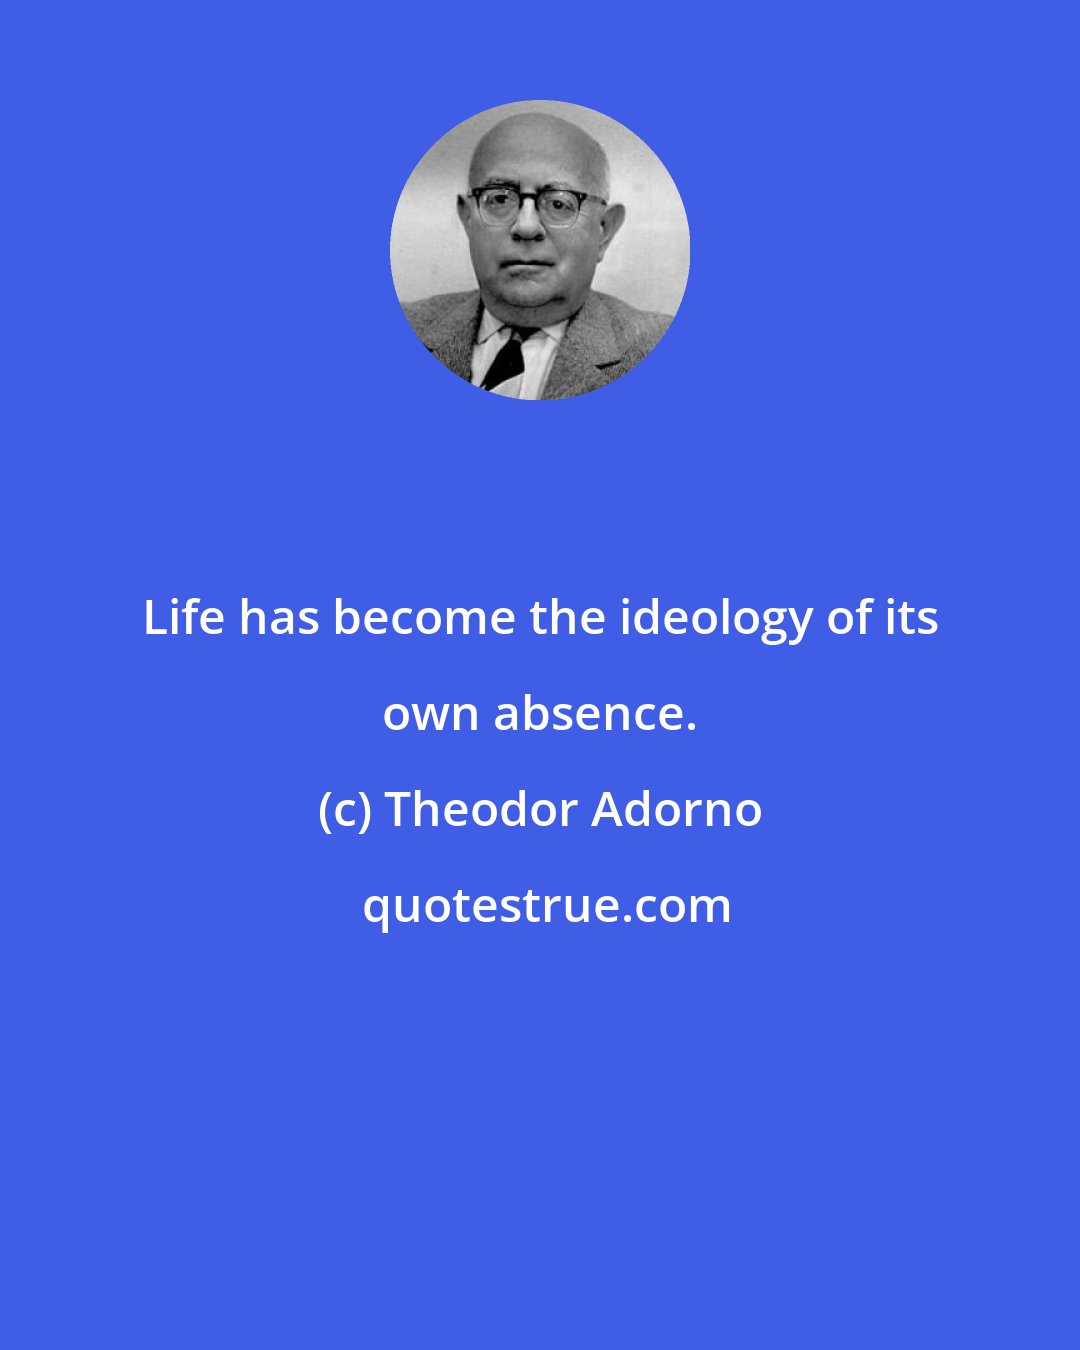 Theodor Adorno: Life has become the ideology of its own absence.